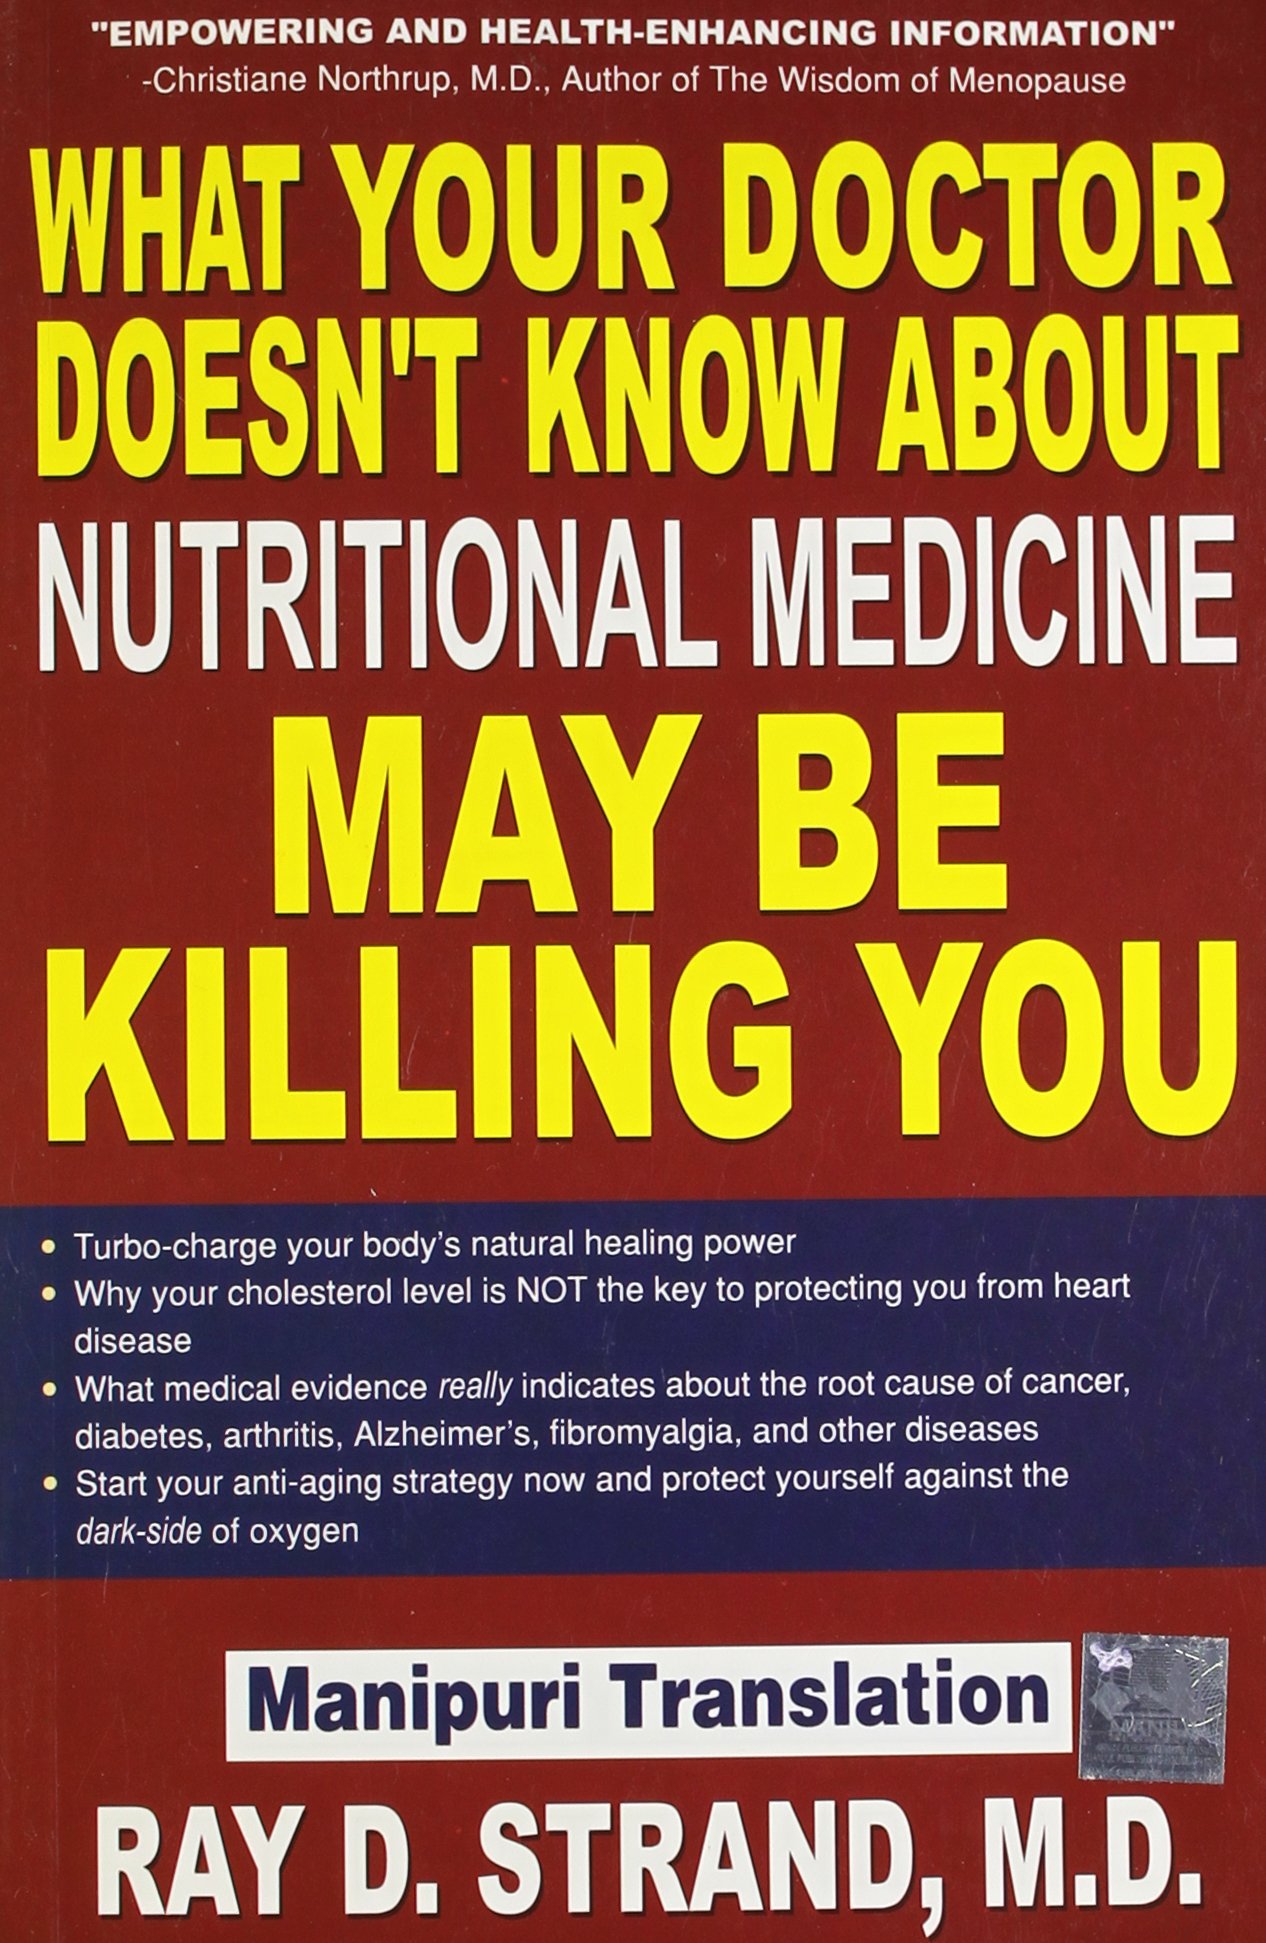 What your doctor doesn’t know about Nutritional Medicine may be killing you